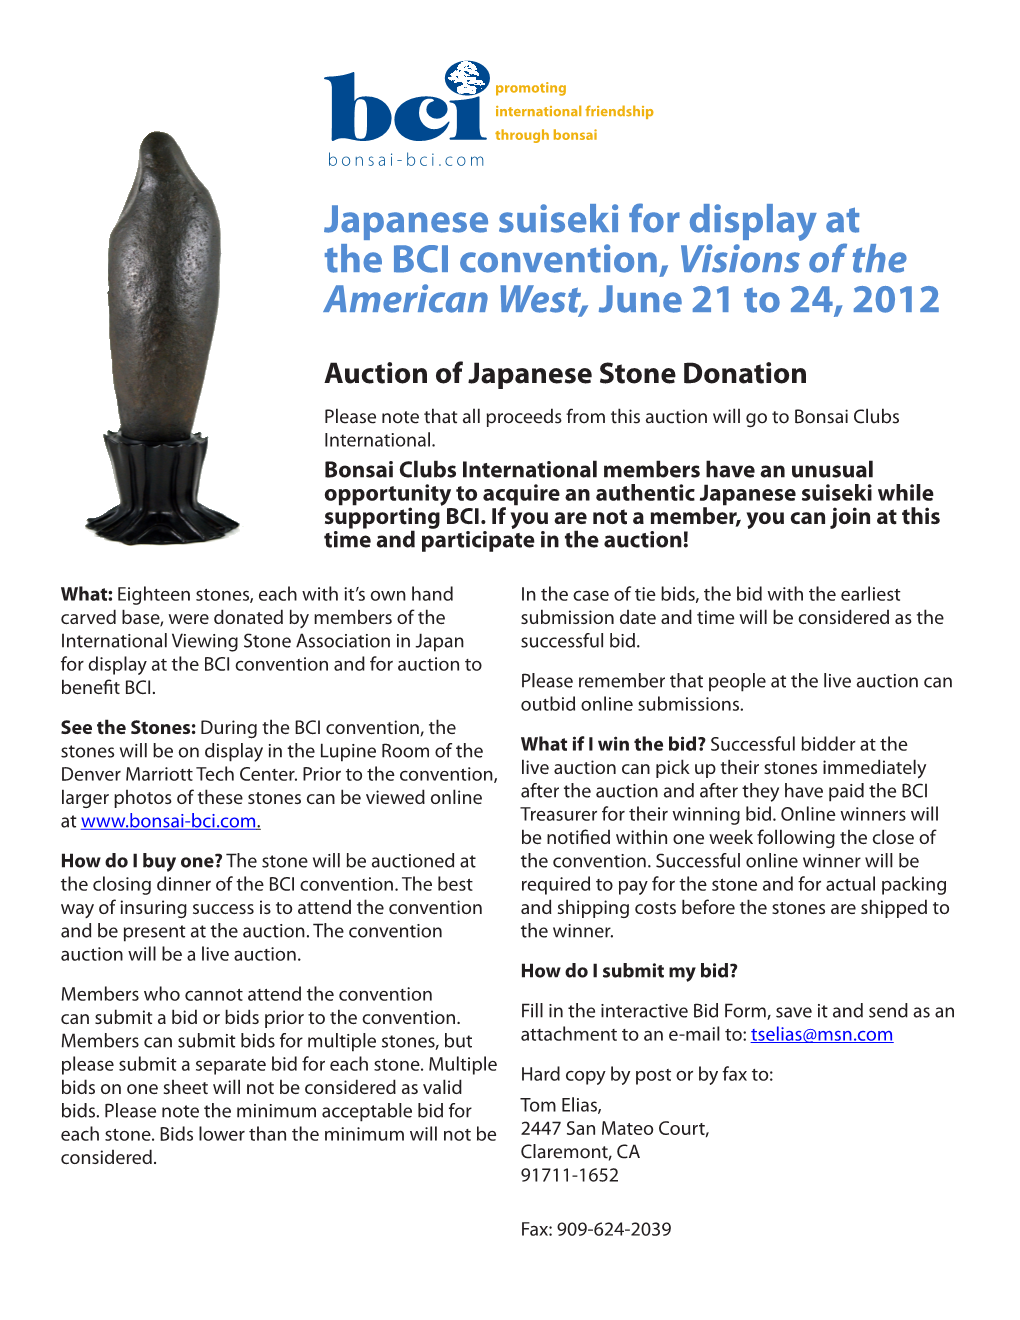 Japanese Suiseki for Display at the BCI Convention, Visions of the American West, June 21 to 24, 2012